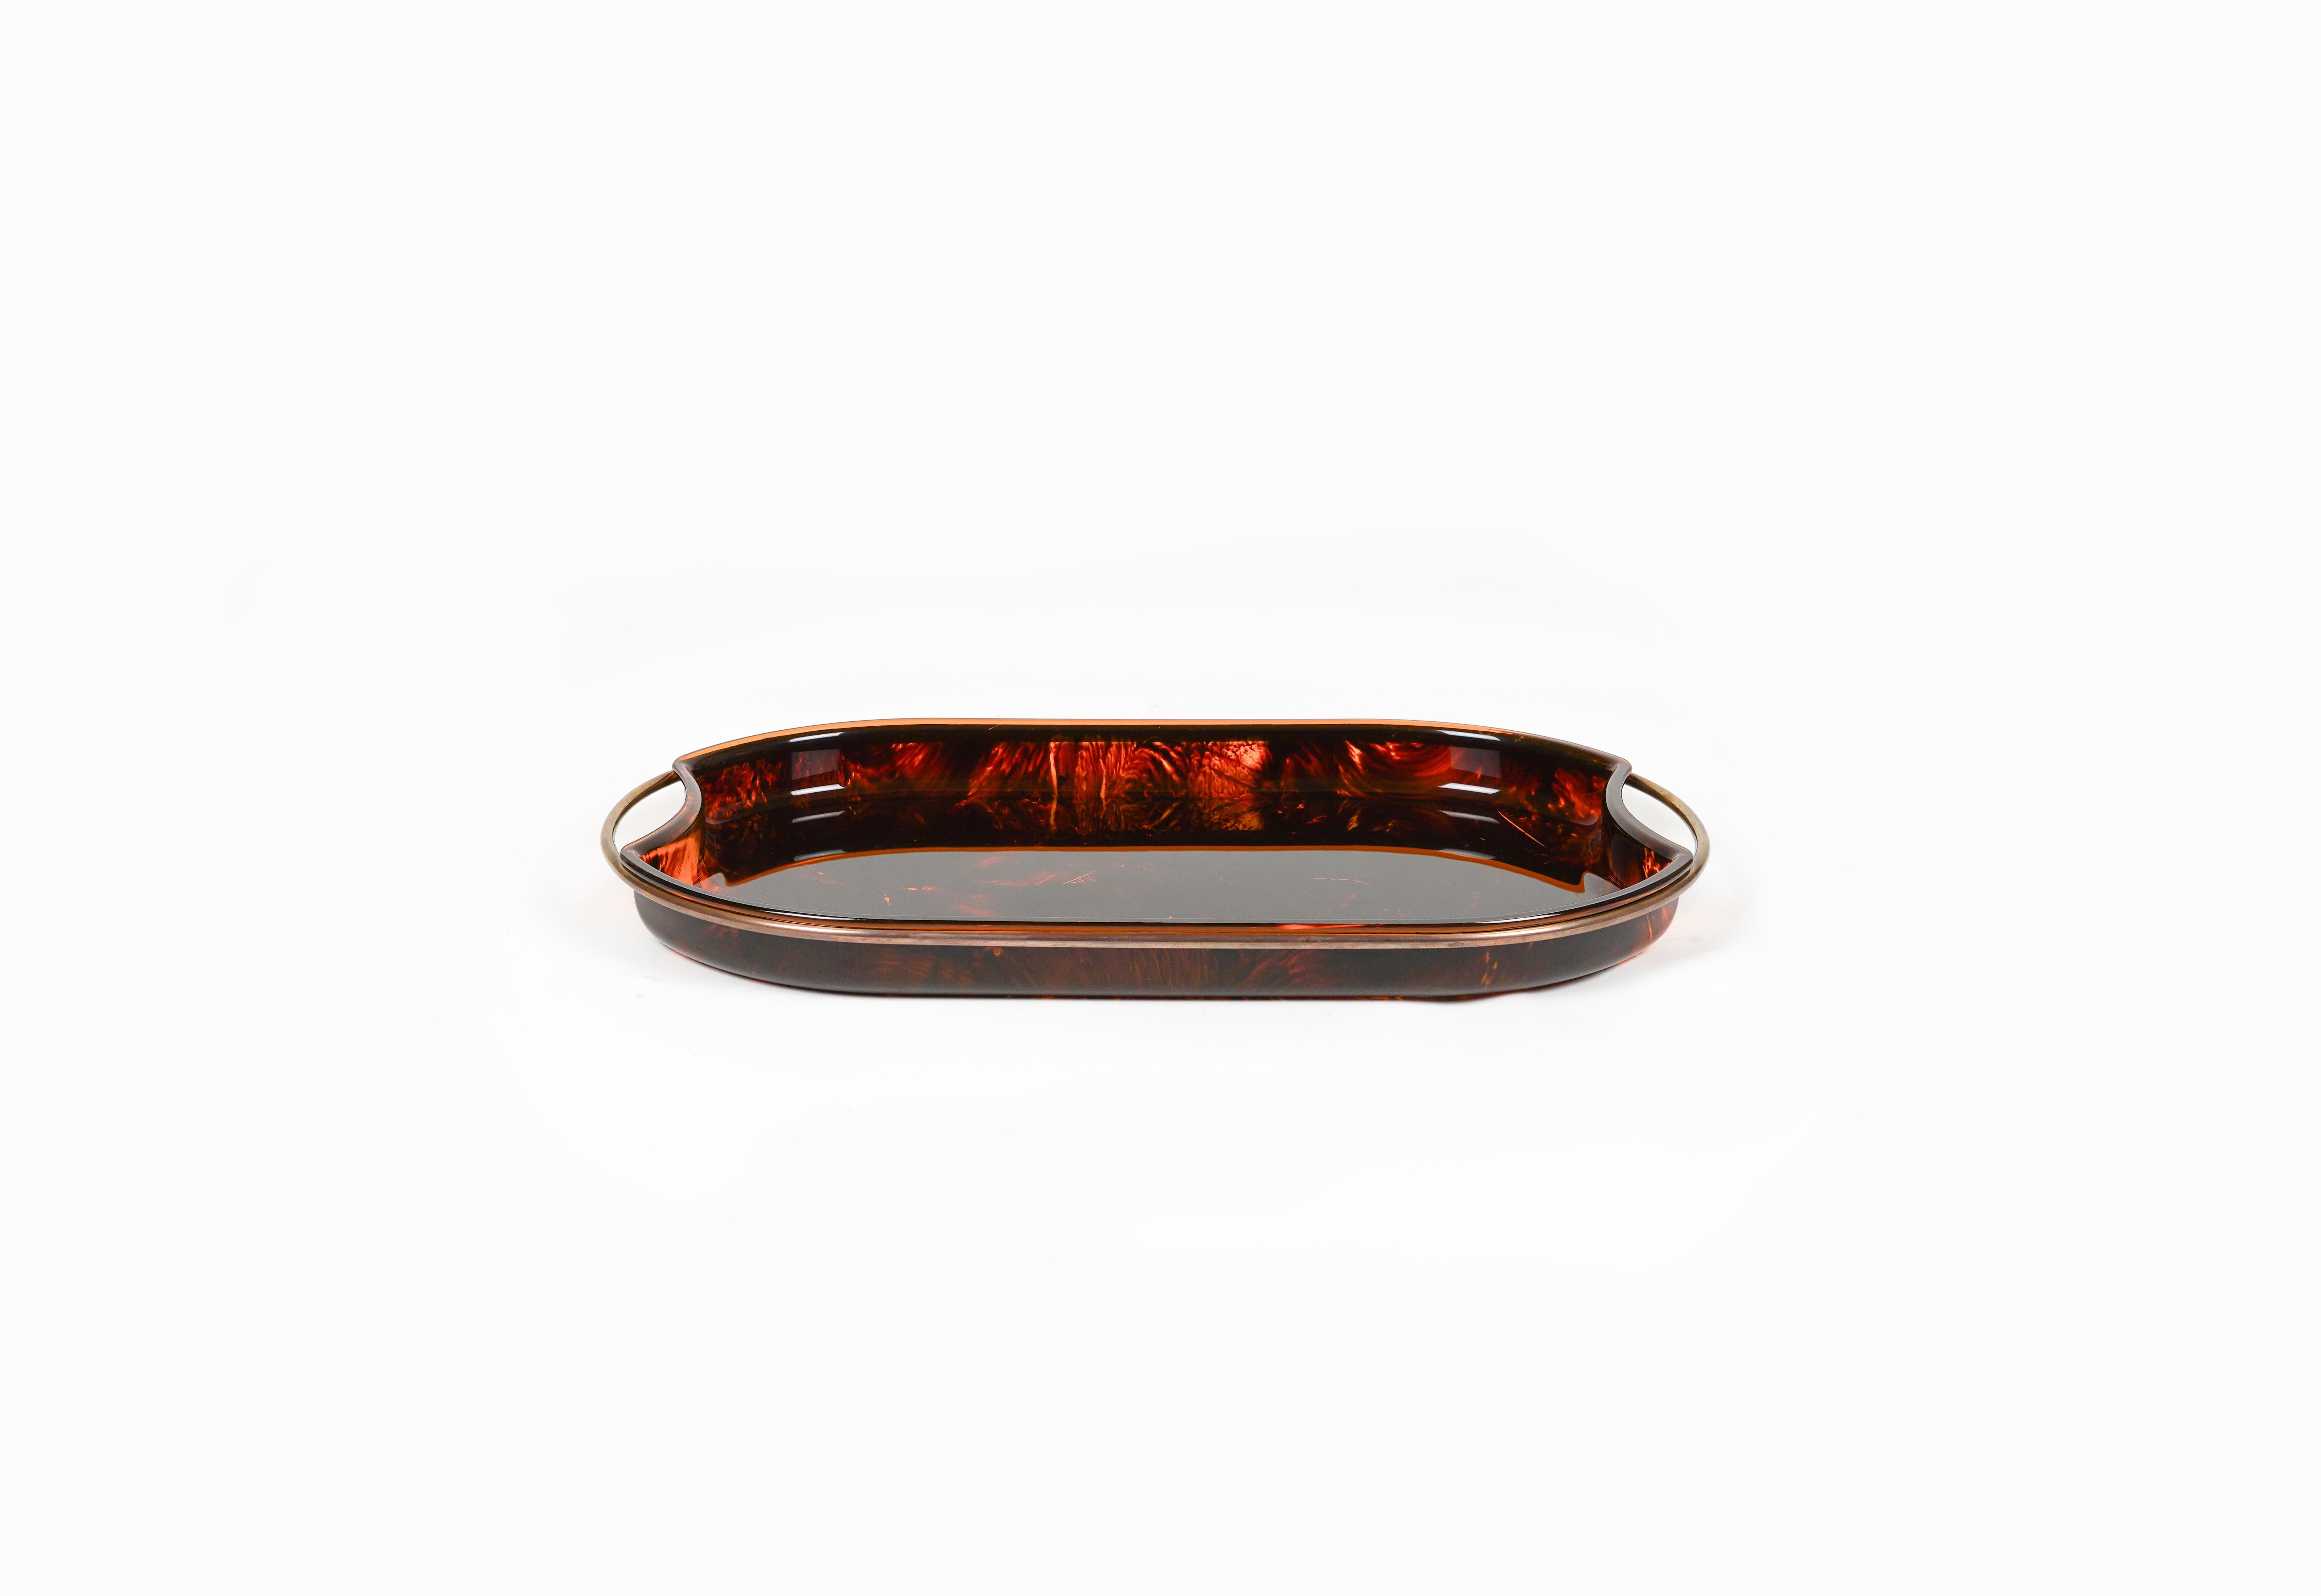 Oval Serving Tray in Effect Tortoiseshell Lucite & Brass by Guzzini, Italy 1970s In Good Condition For Sale In Rome, IT